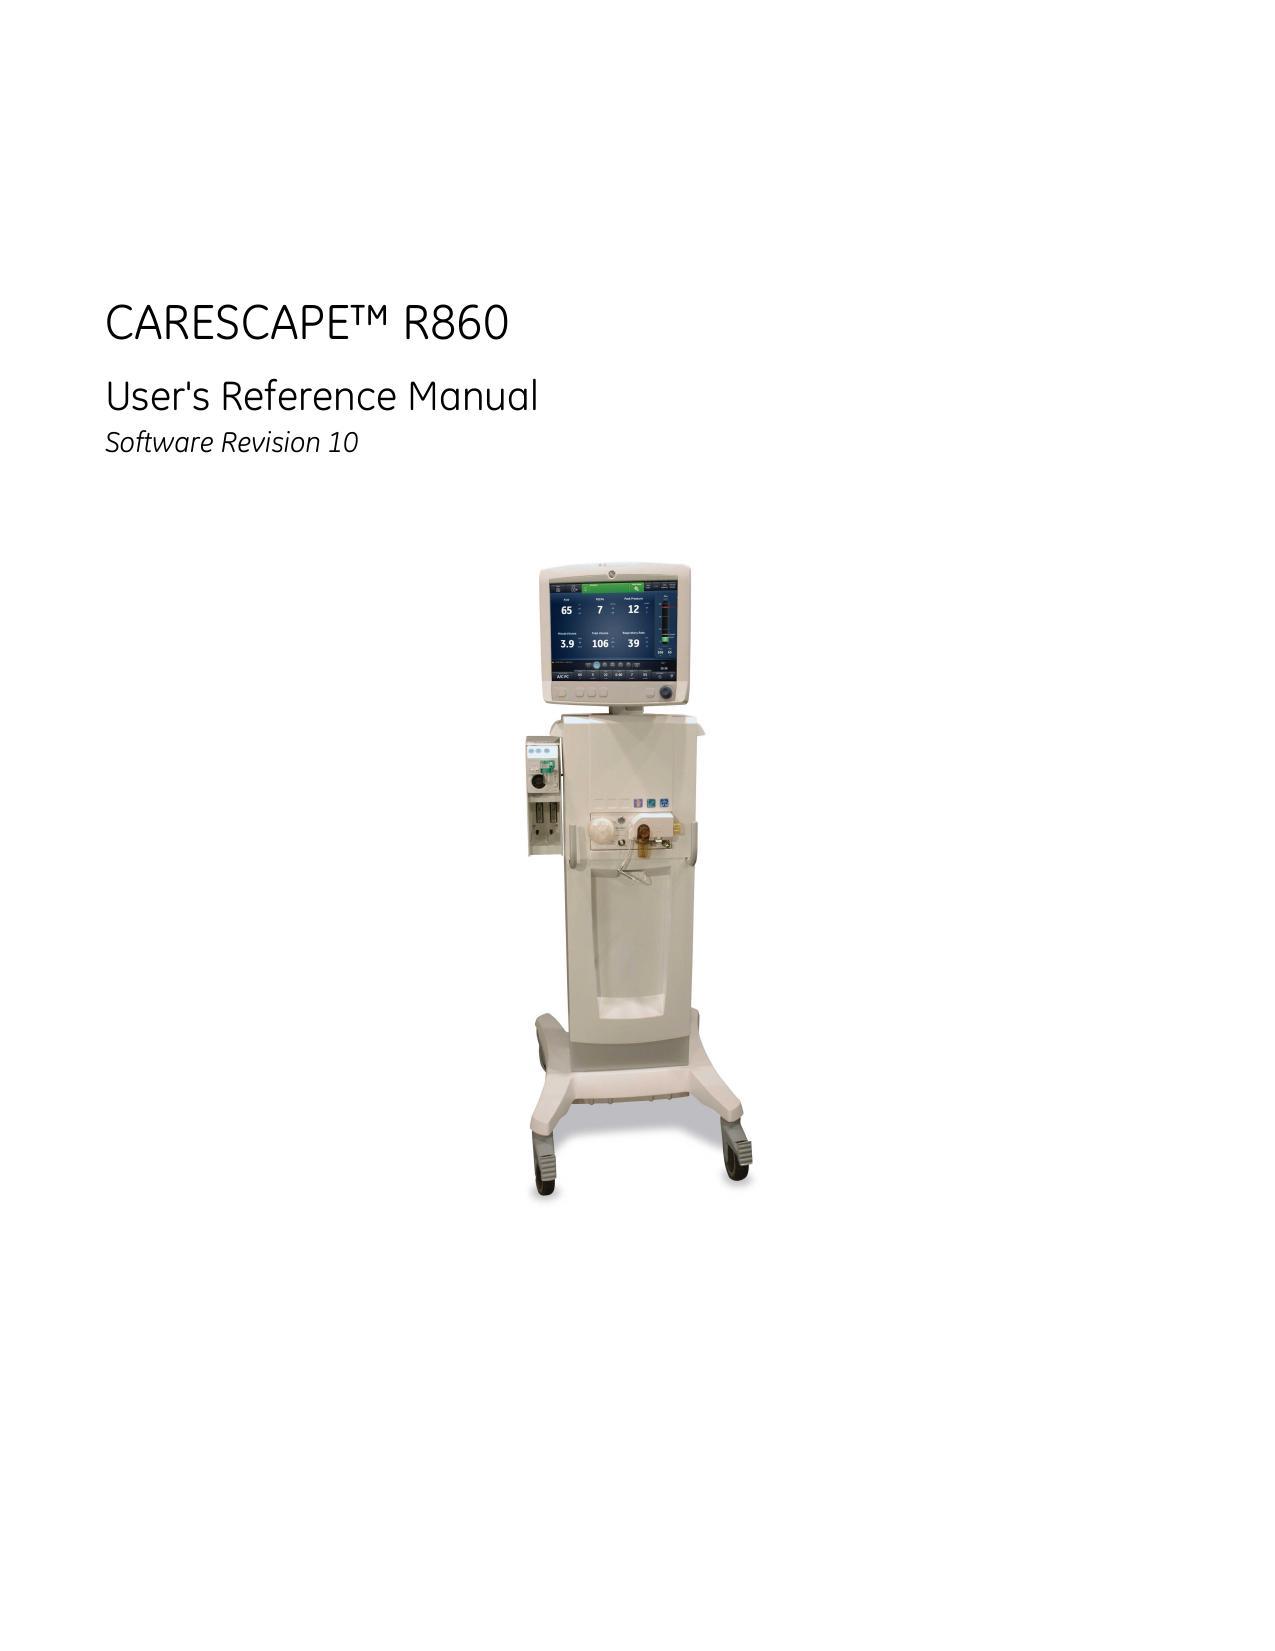 carescape-r860-users-reference-manual---software-revision-10.pdf